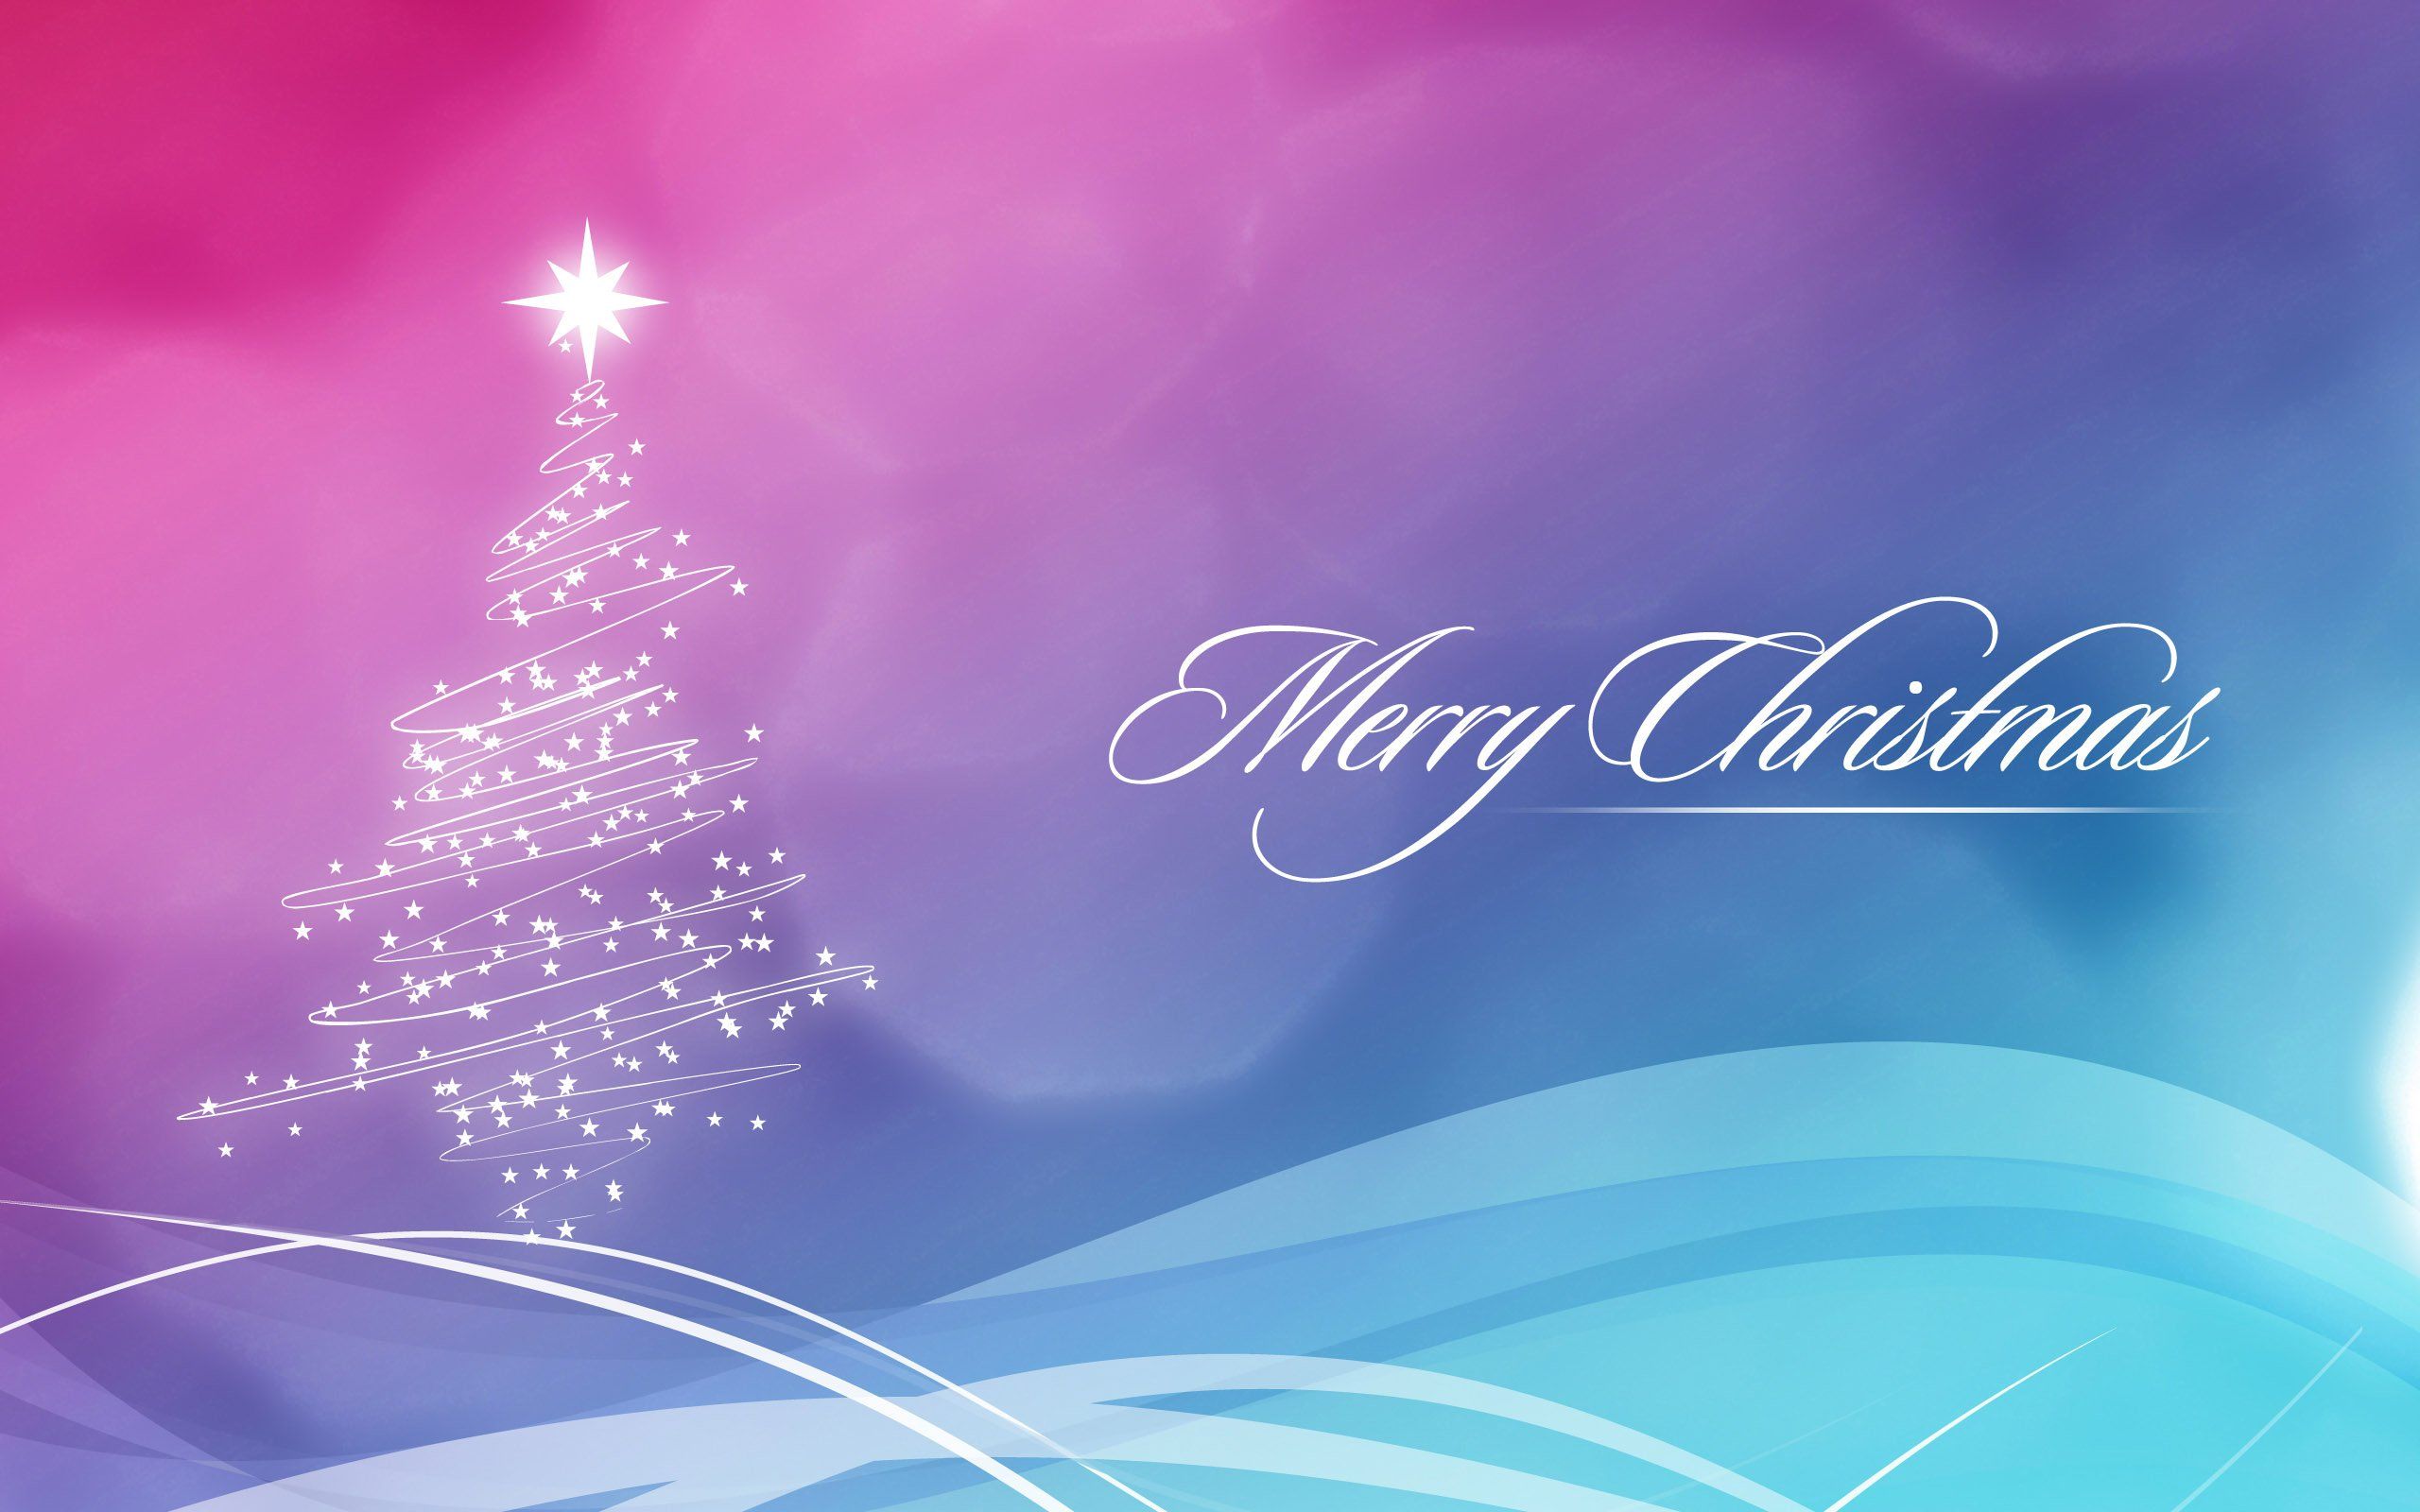 Merry Christmas Wallpaper 2020 HD. BackGround Image >! Download